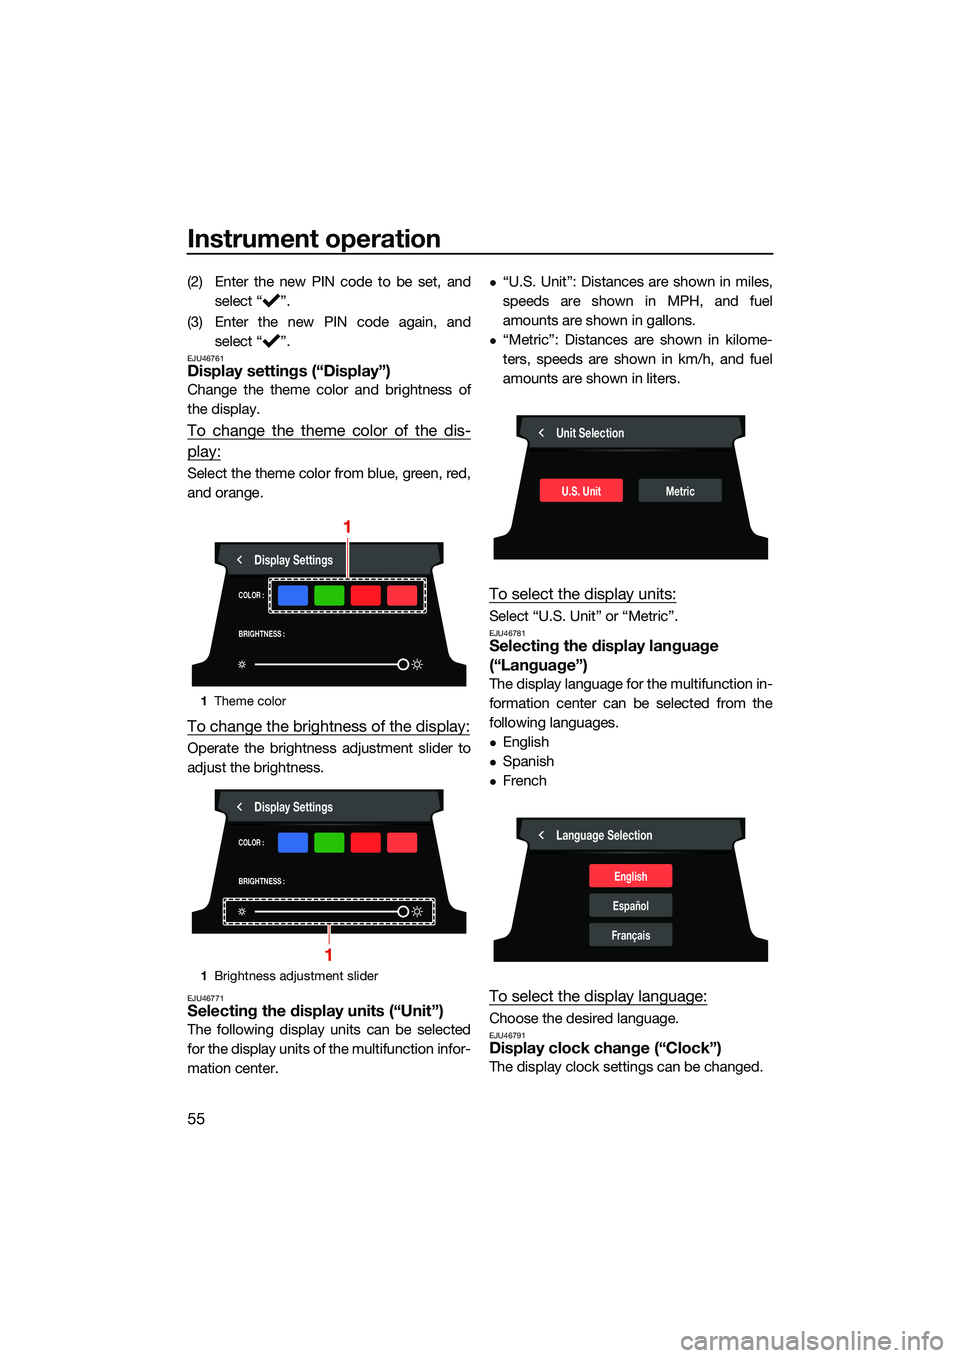 YAMAHA FX HO 2022  Owners Manual Instrument operation
55
(2) Enter the new PIN code to be set, andselect “ ”.
(3) Enter the new PIN code again, and select “ ”.
EJU46761Display settings (“Display”)
Change the theme color a